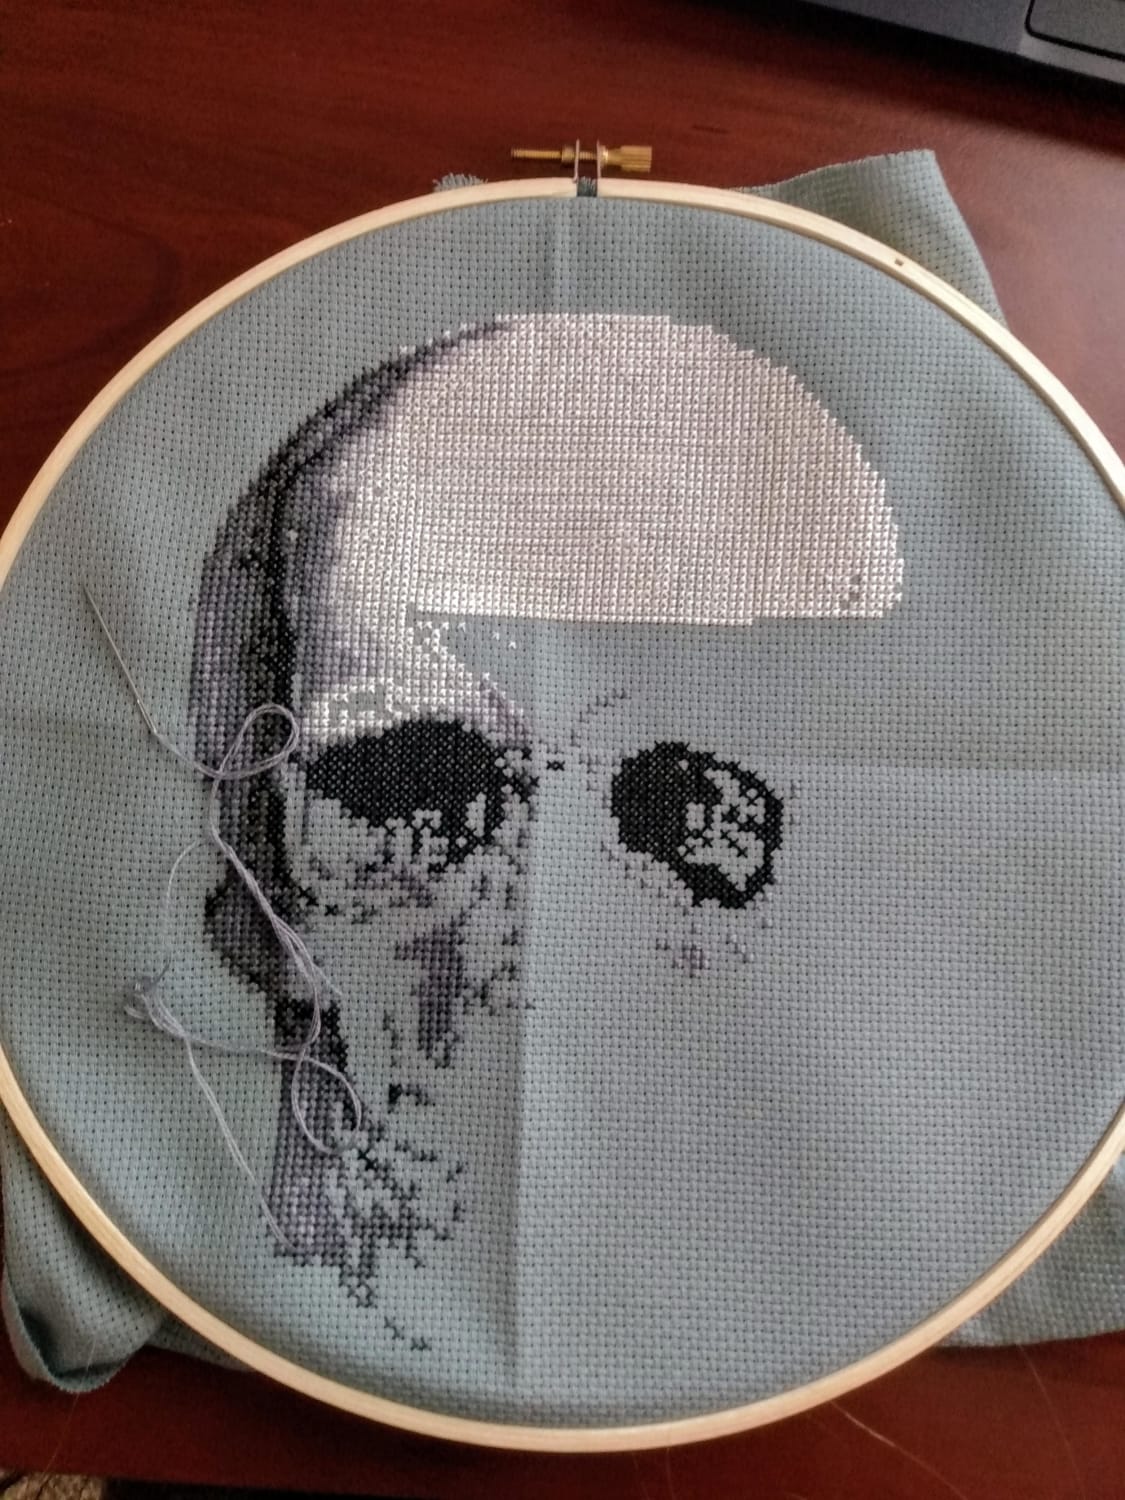 [WIP] This will be my first finished project. I'm taking an anatomy class and my teacher agreed to let me submit this for extra credit instead of having to write a paper.